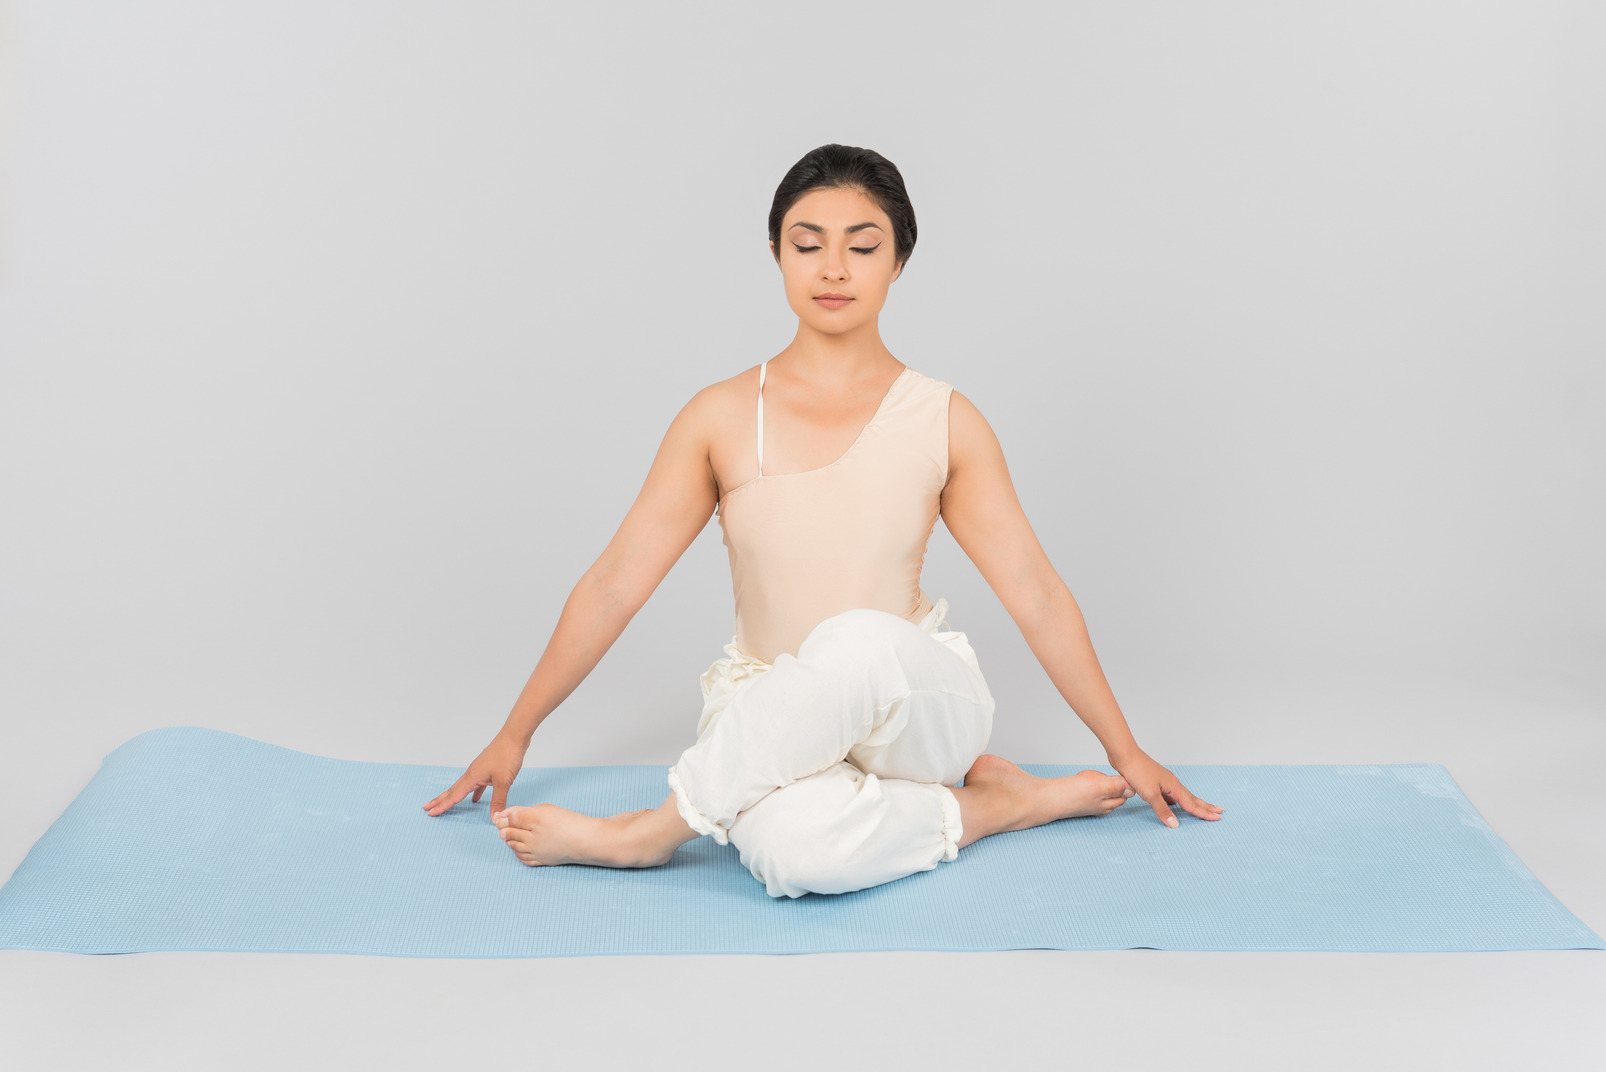 Young indian woman sitting on yoga mat with legs crossed and eyes closed